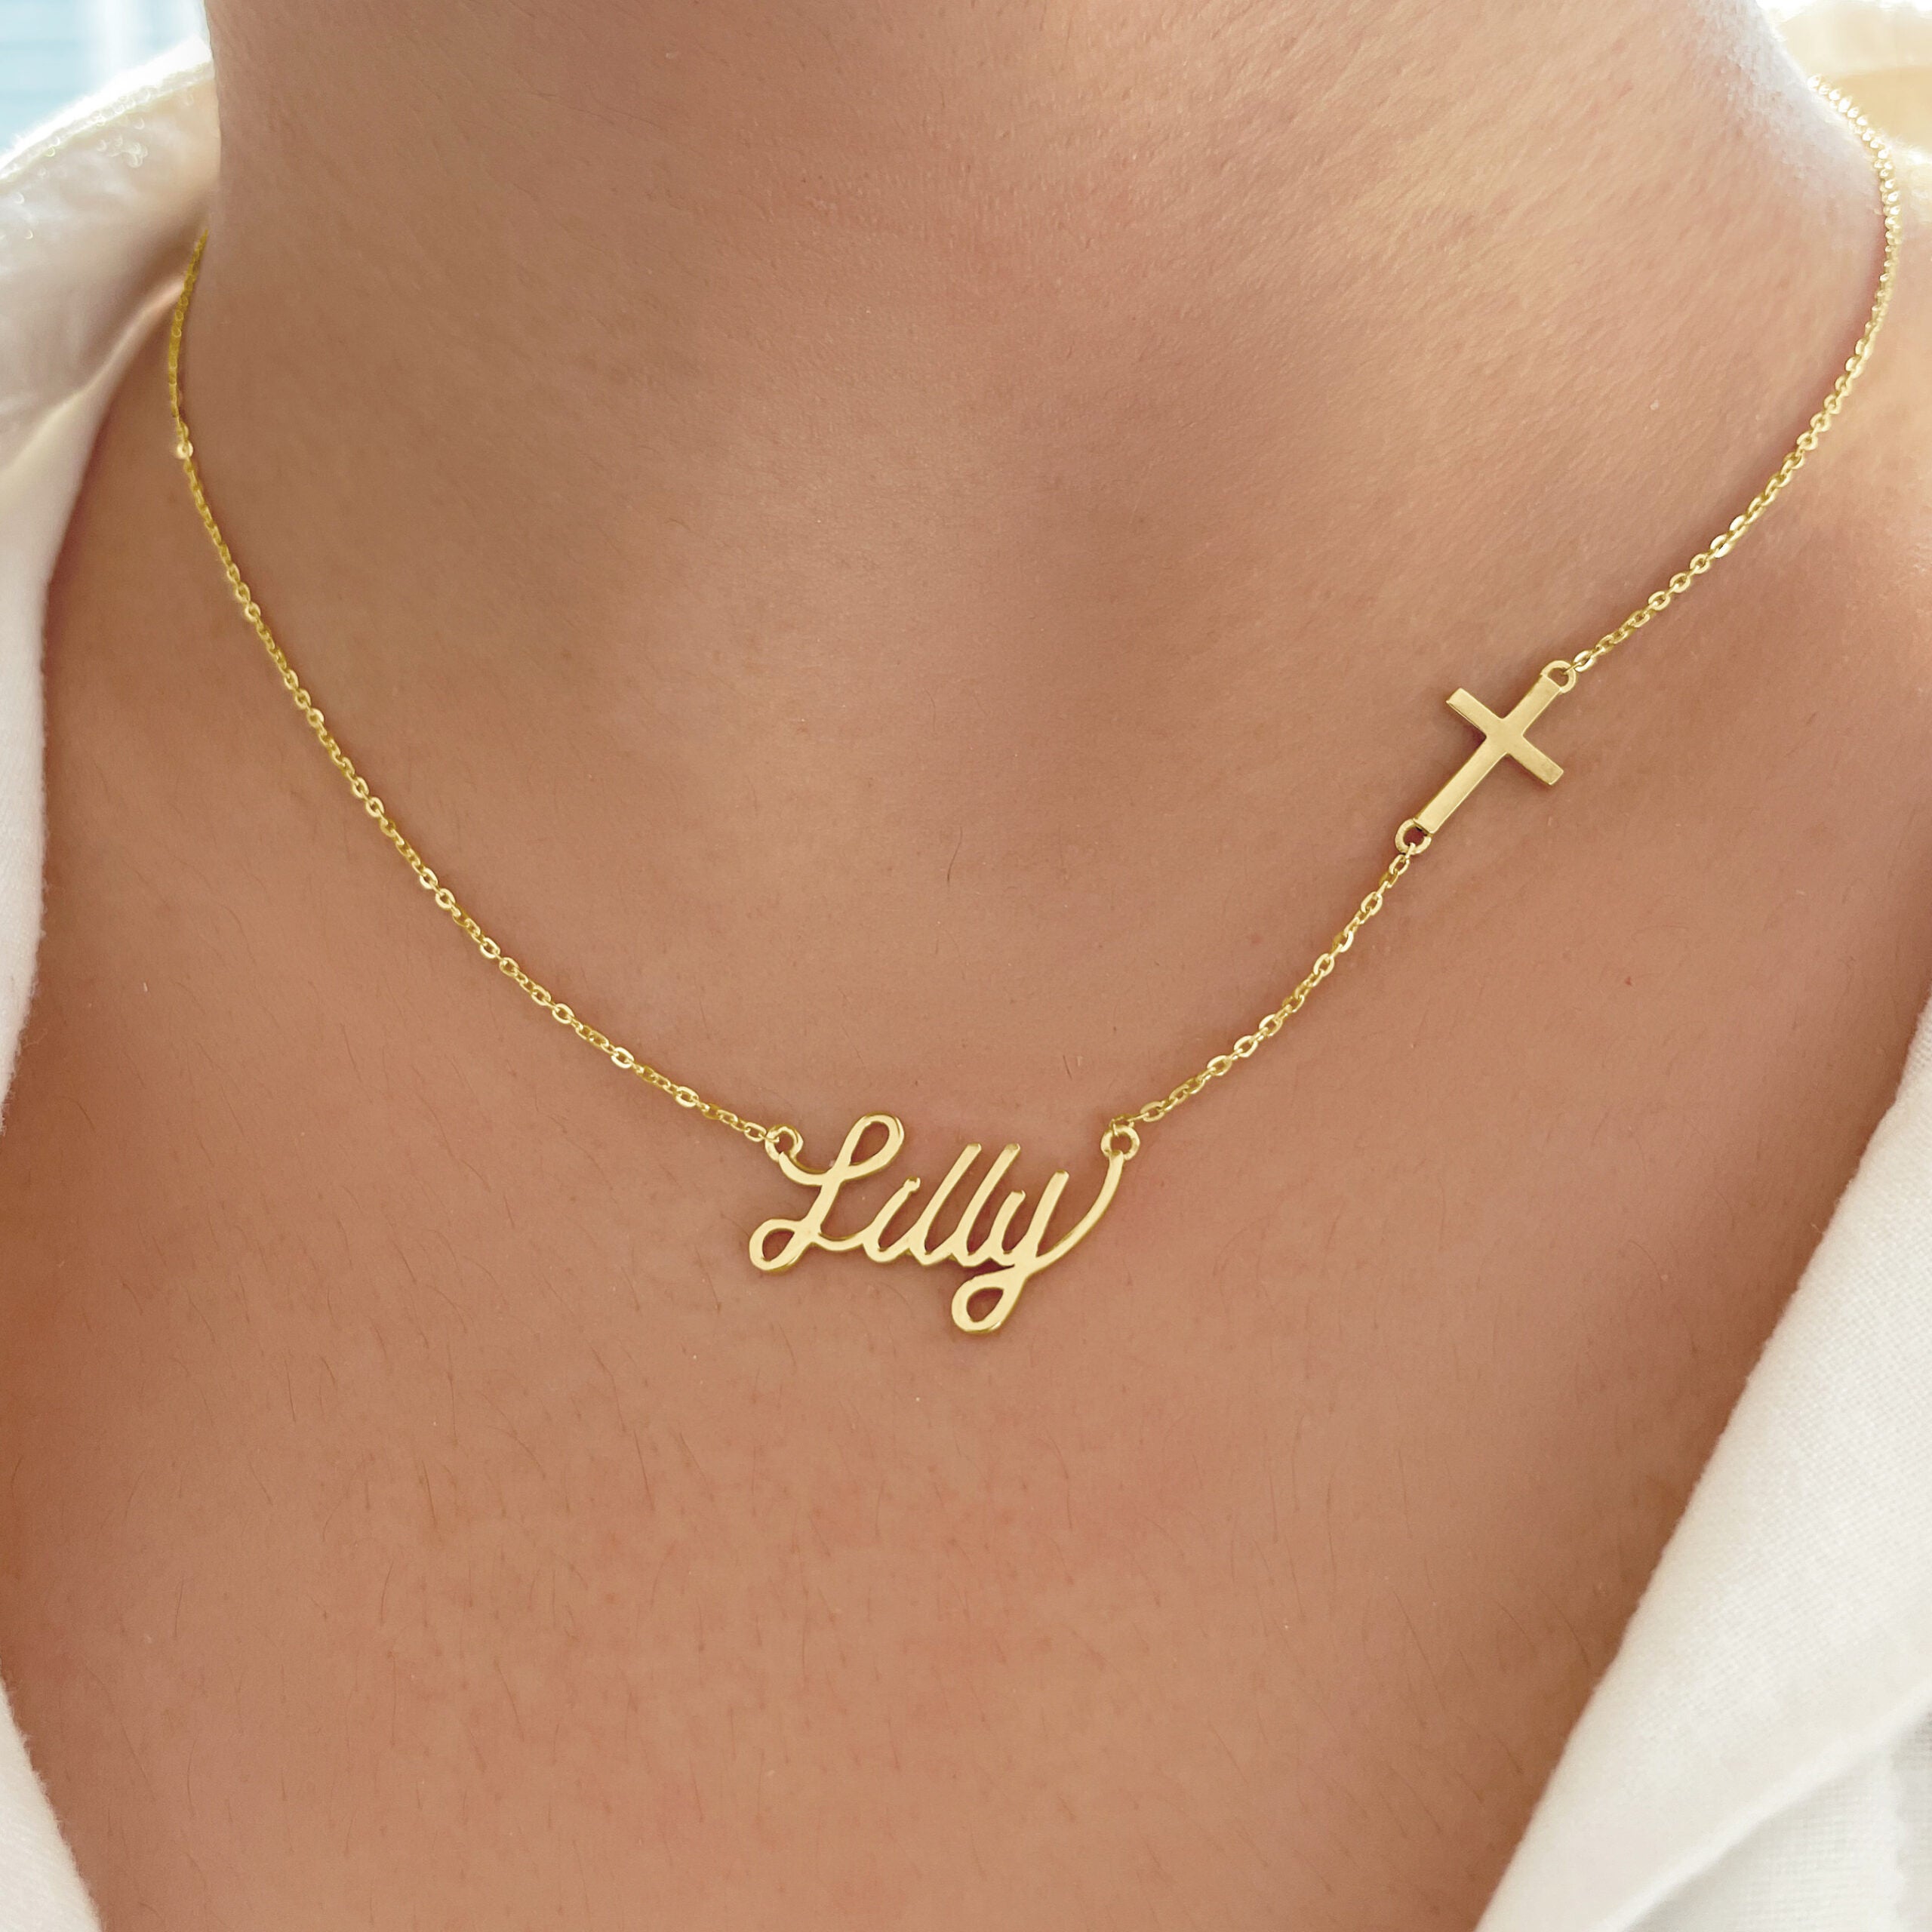 Name & Cross Necklace